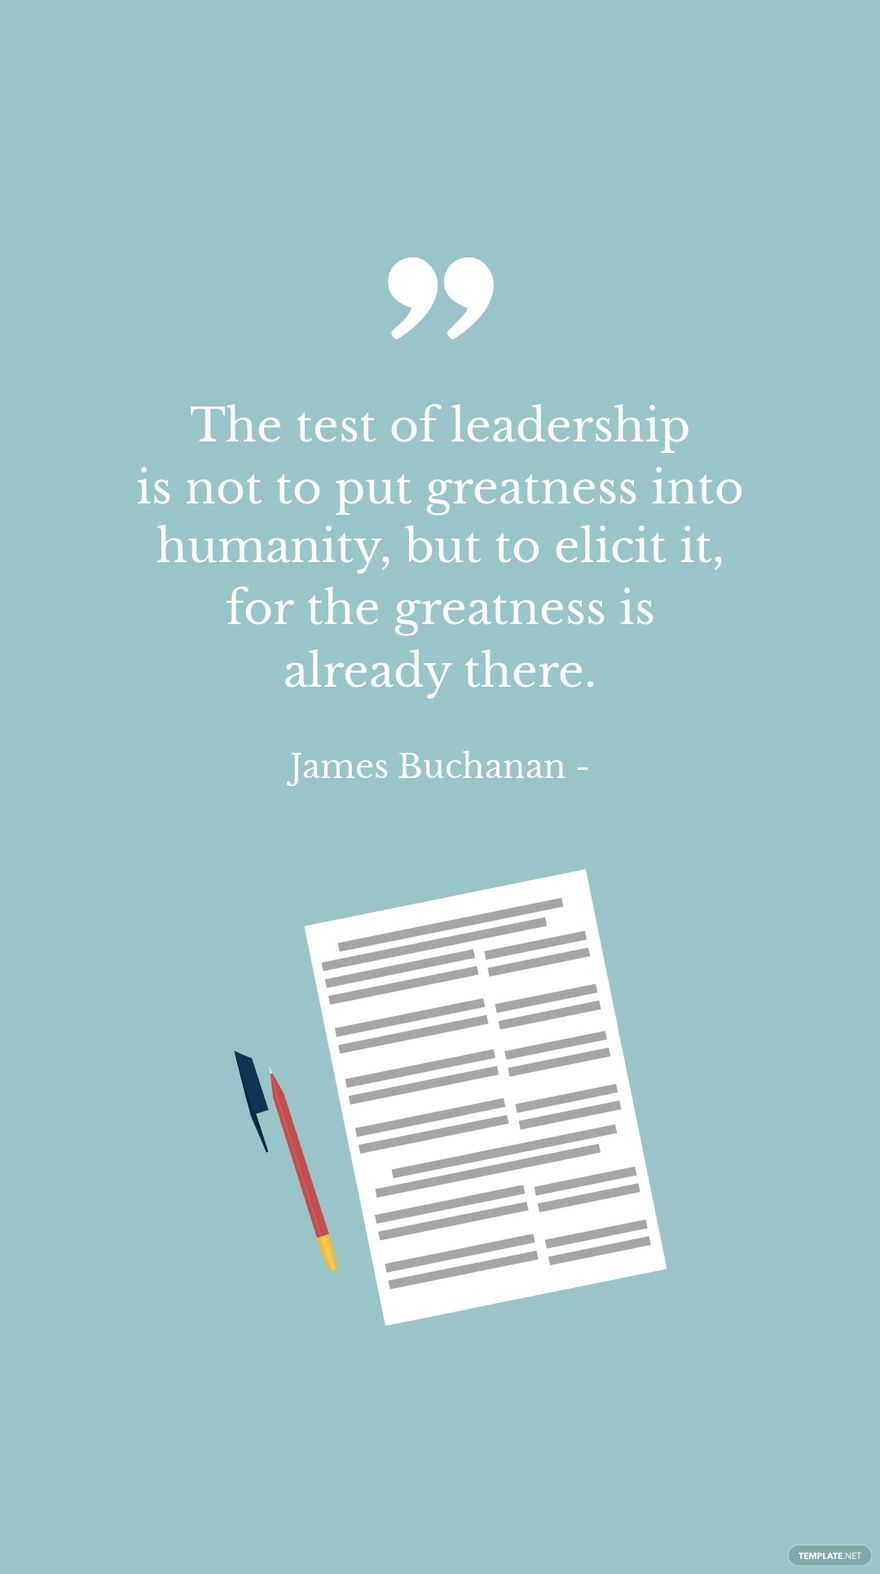 Free James Buchanan - The test of leadership is not to put greatness into humanity, but to elicit it, for the greatness is already there. in JPG